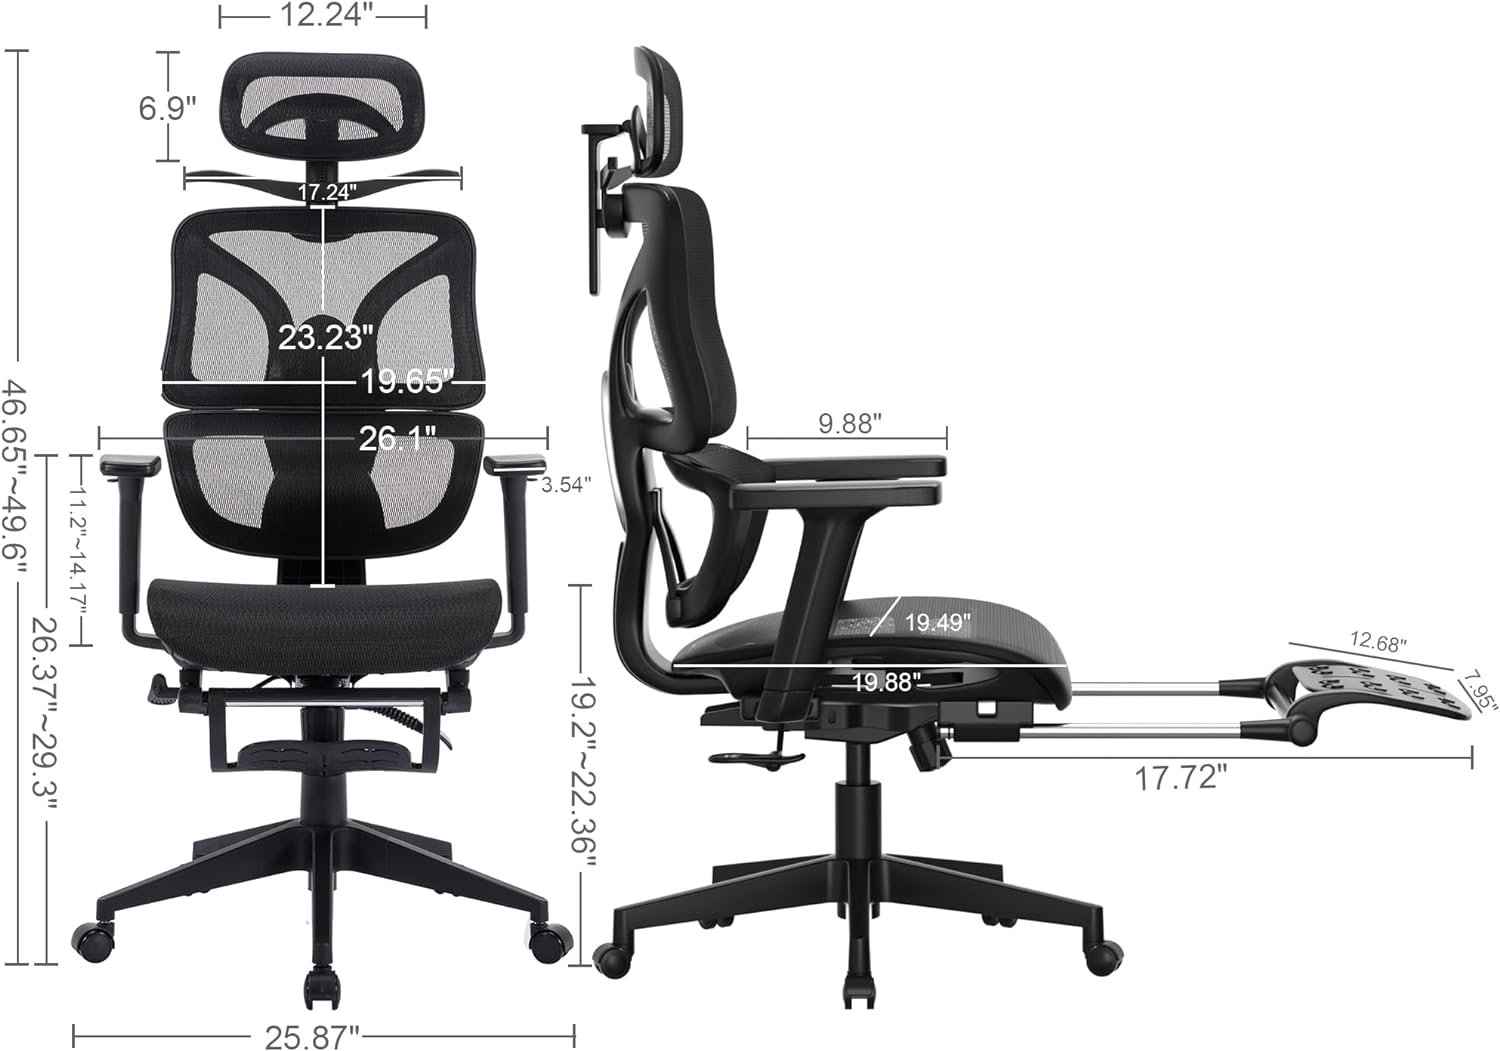 VECELO Swivel Ergonomic High Back Mesh Office Chair with Retractable Footrest